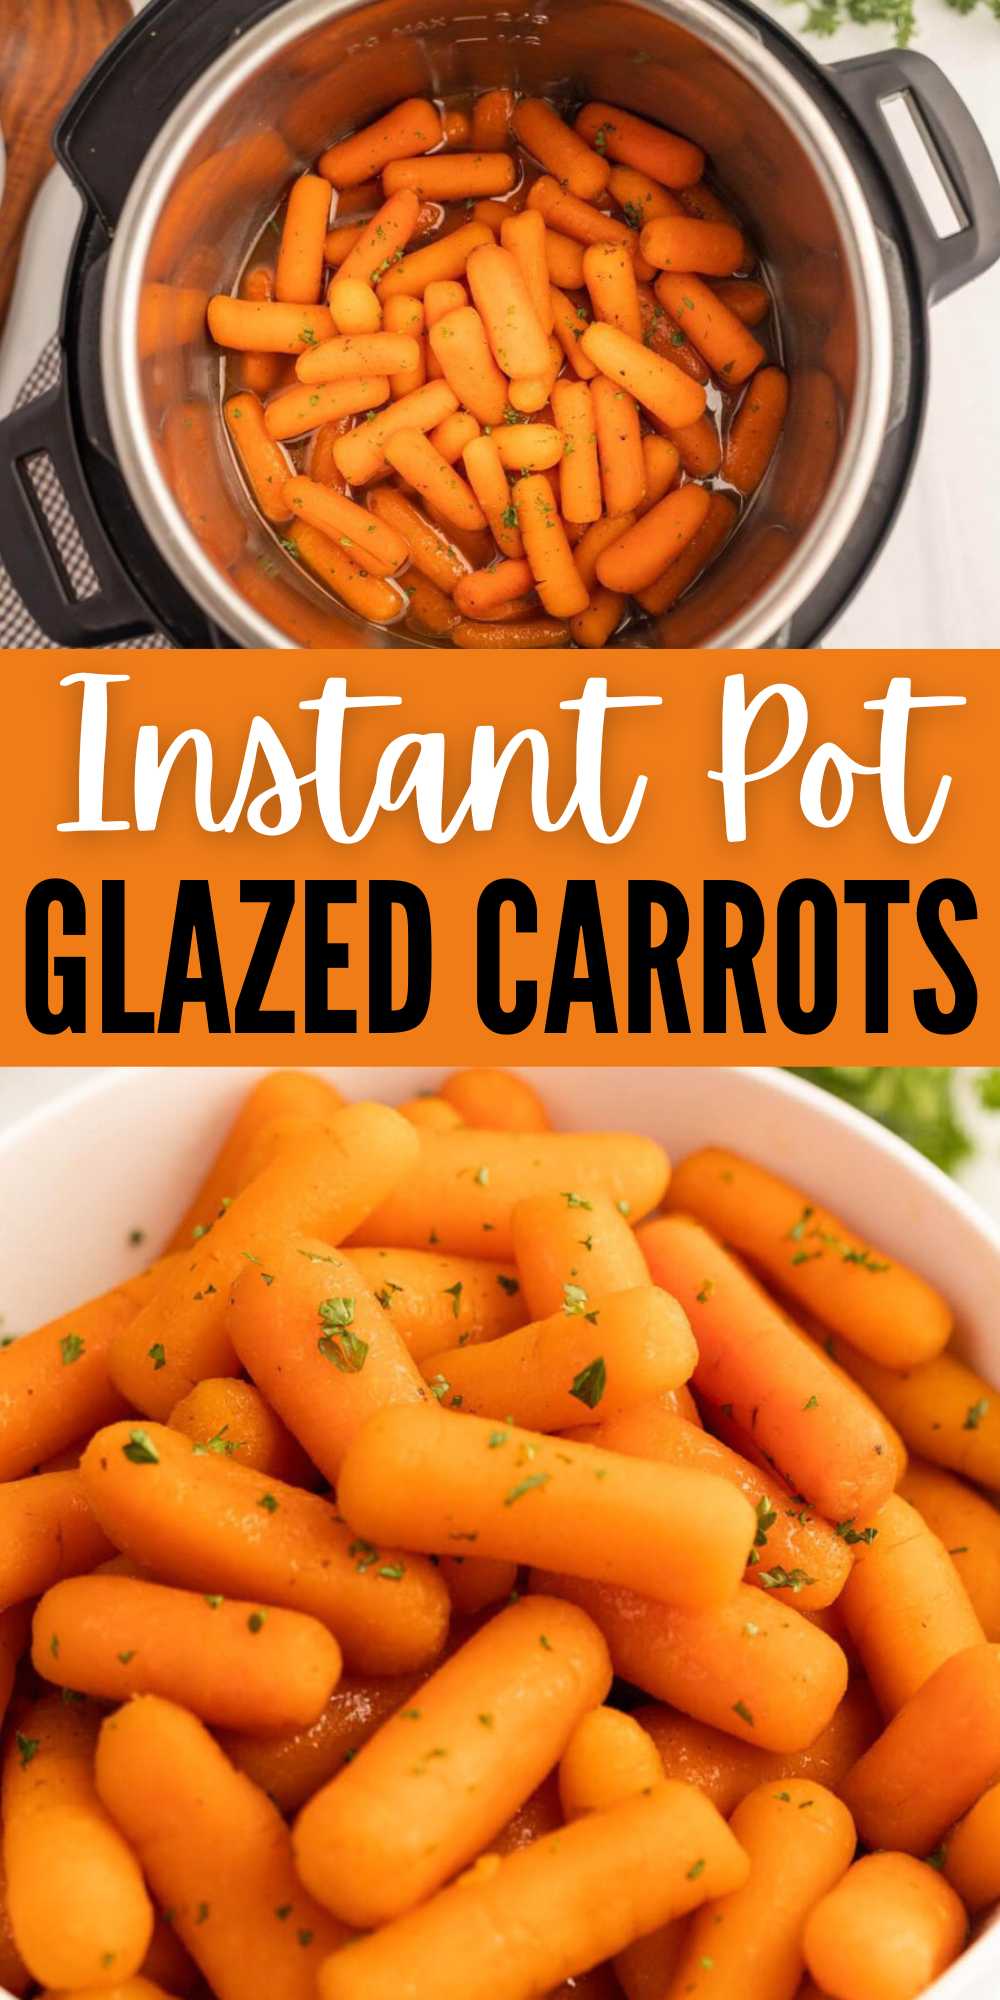 Instant Pot brown sugar carrots tastes great and quick and easy to make. The perfect side dish with many different recipes. We love the brown sugar glaze as it adds just the right amount of sweetness to the carrots. Brown sugar carrots instant pot recipe is budget friendly and are a family favorite. #eatingonadime #instantpotglazedcarrots #pressurecooker #sidedish